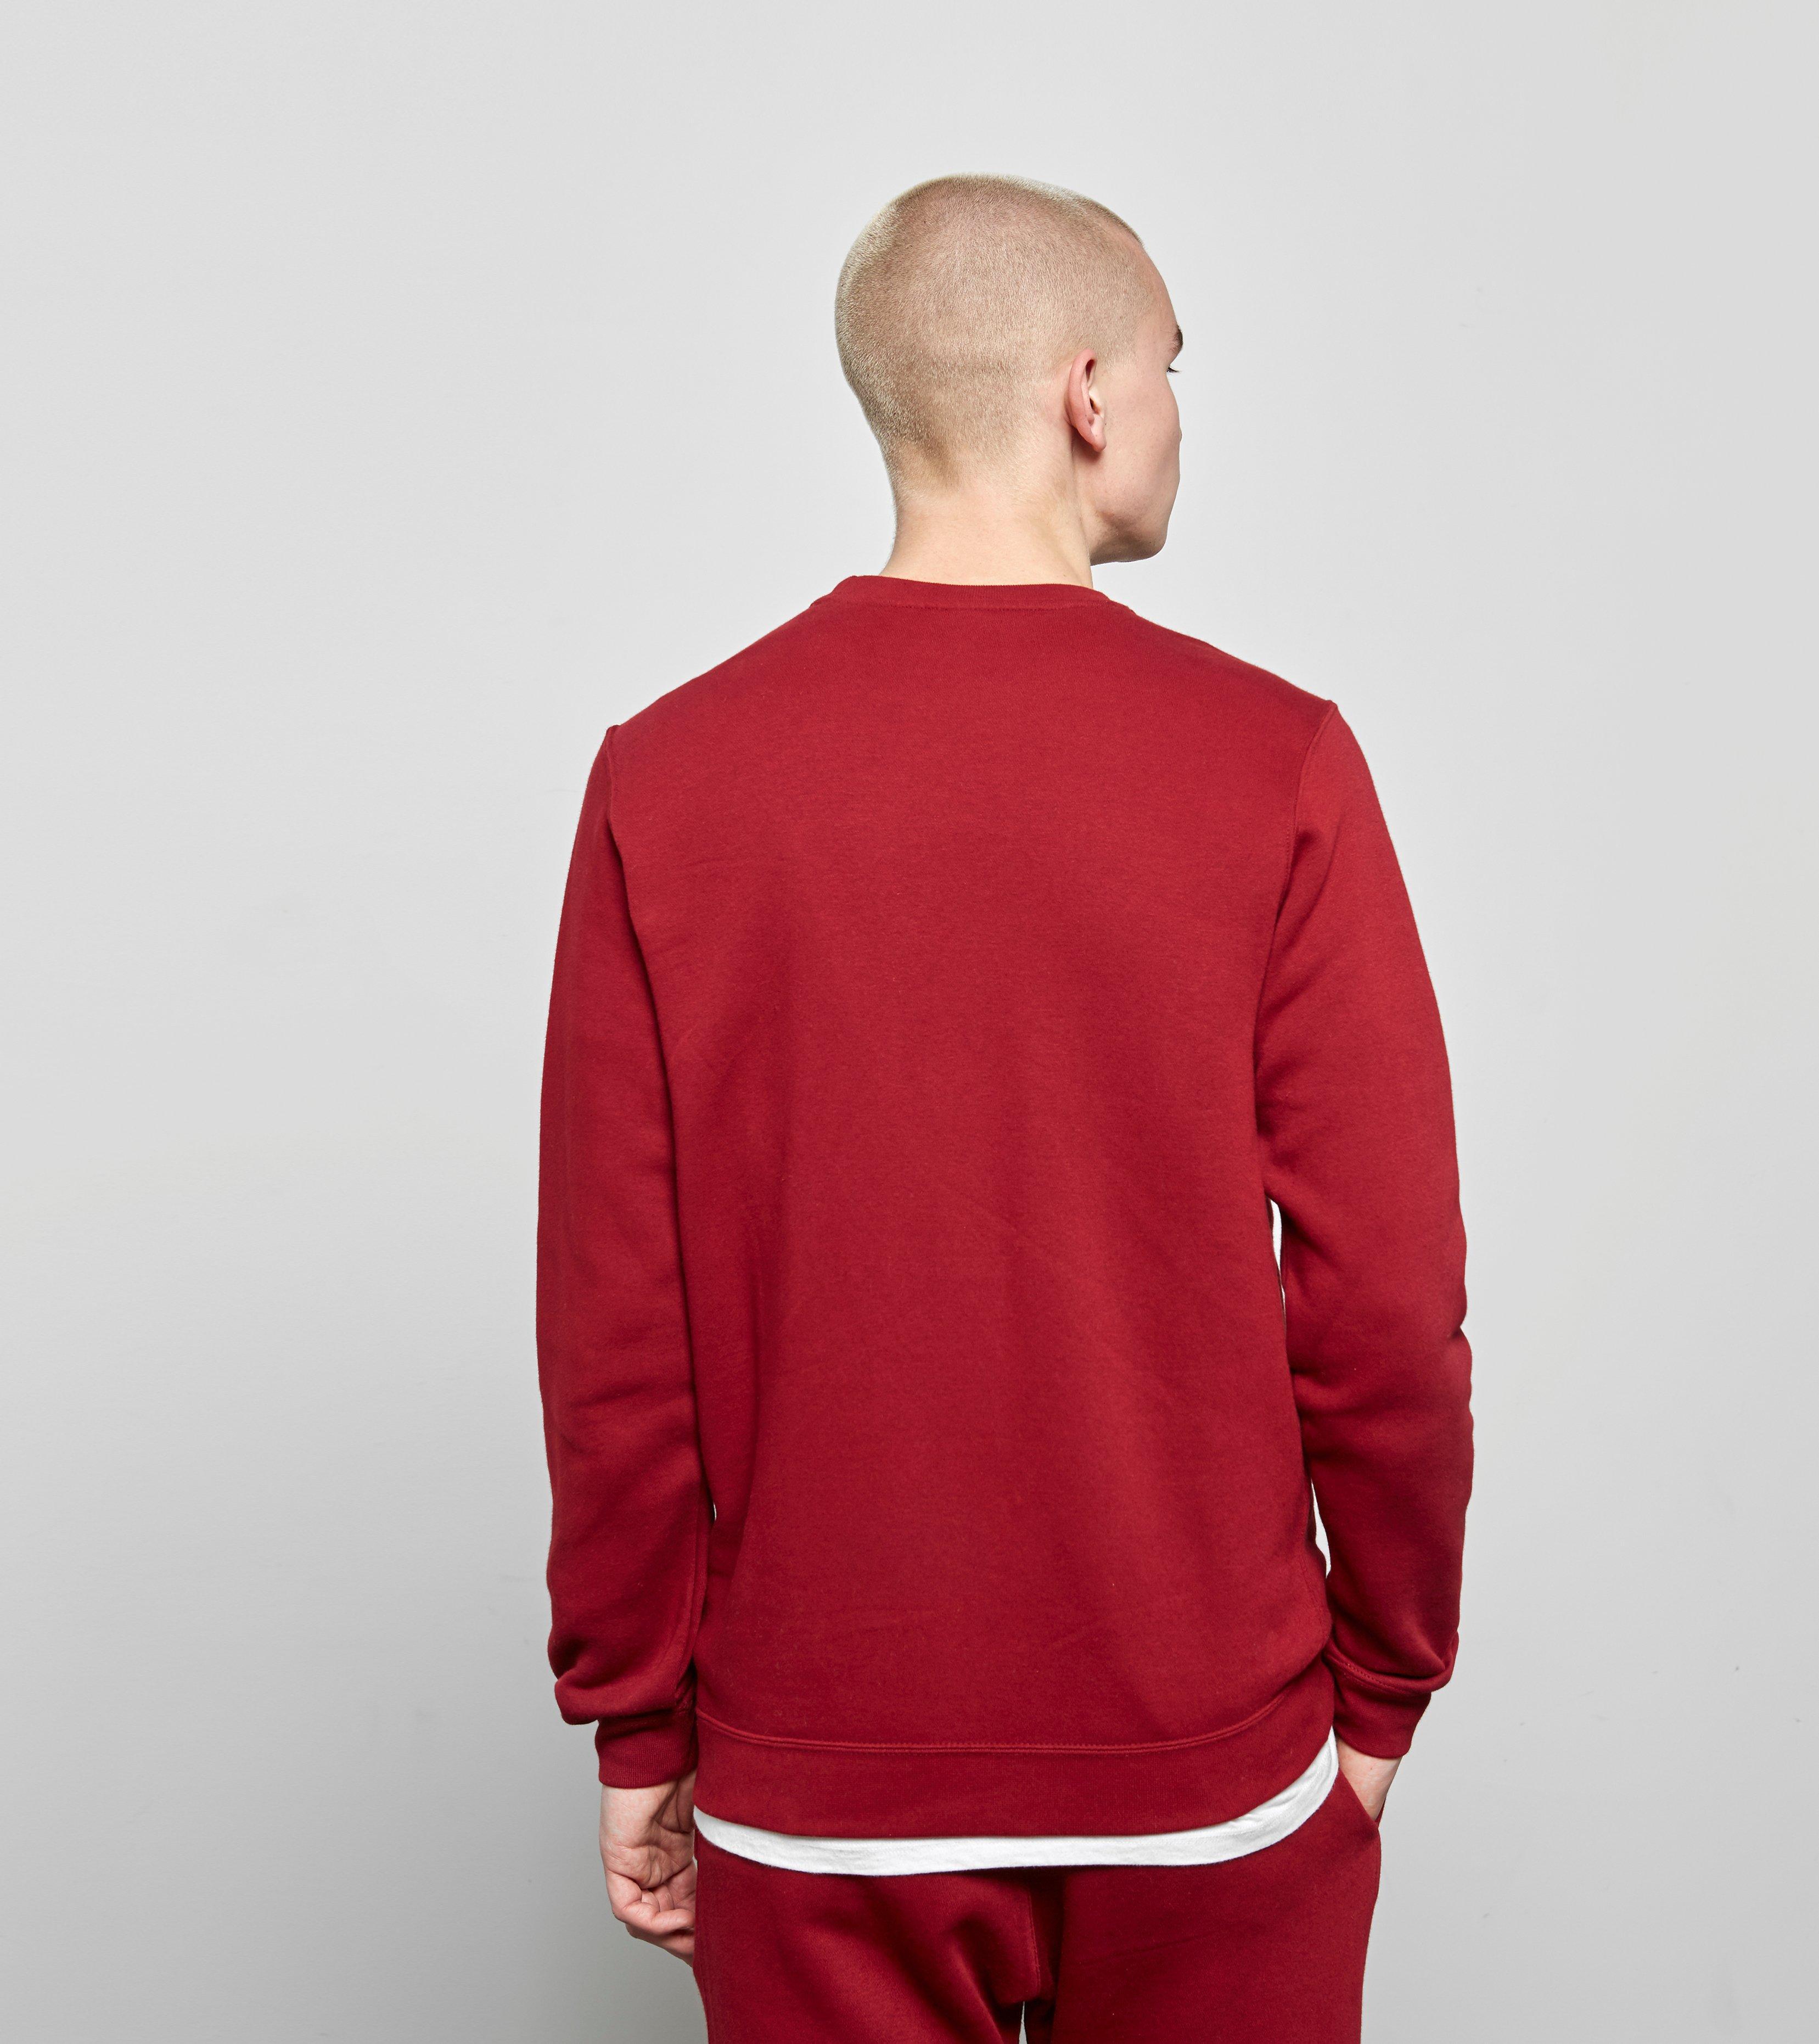 Nike Cotton Foundation Crew Sweatshirt in Red for Men - Lyst